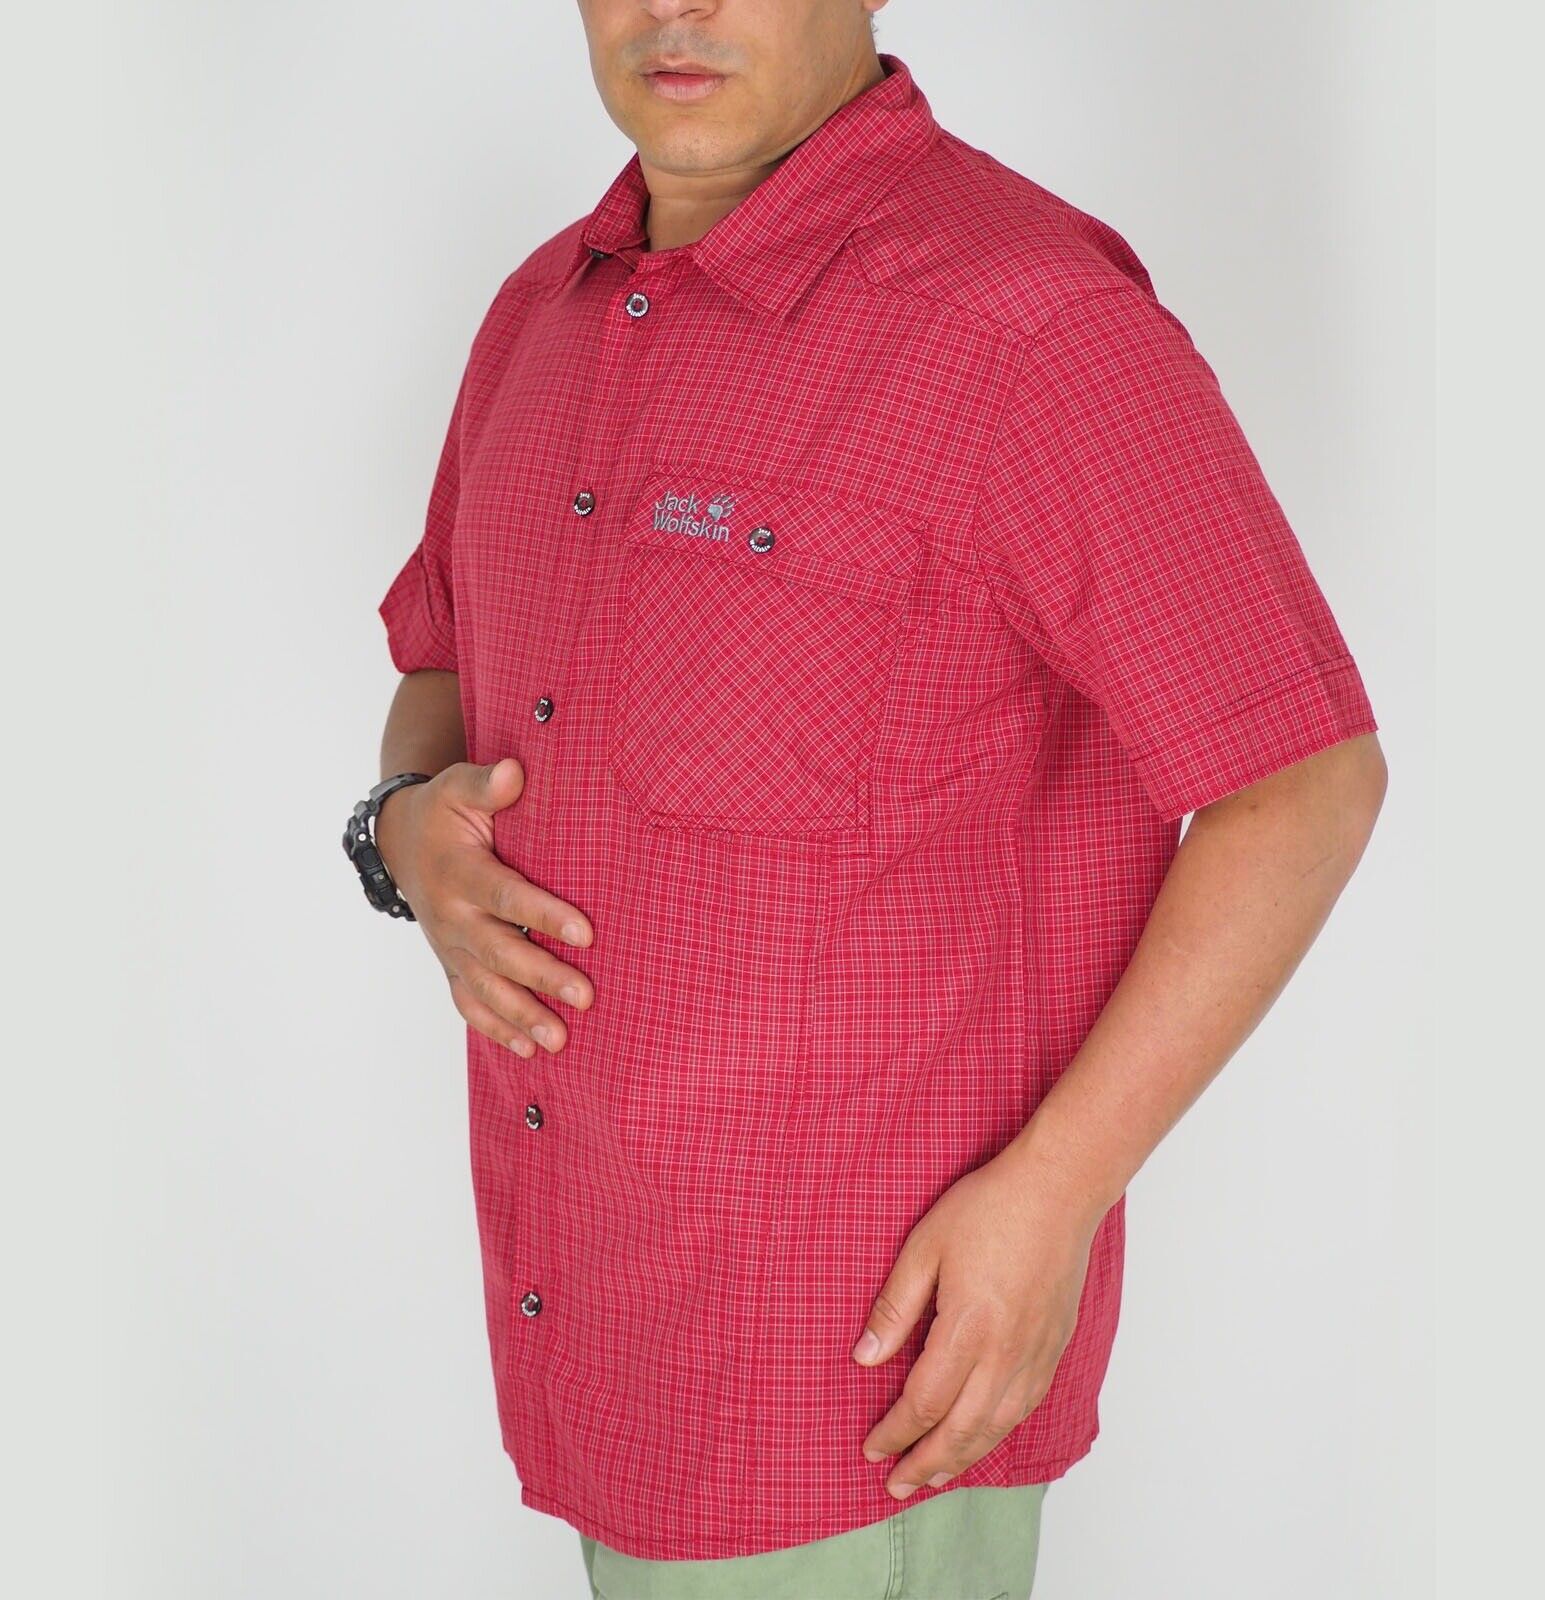 Mens Jack Wolfskin 5009321 Indian Red Checks Short Sleeved Shirt - London Top Style